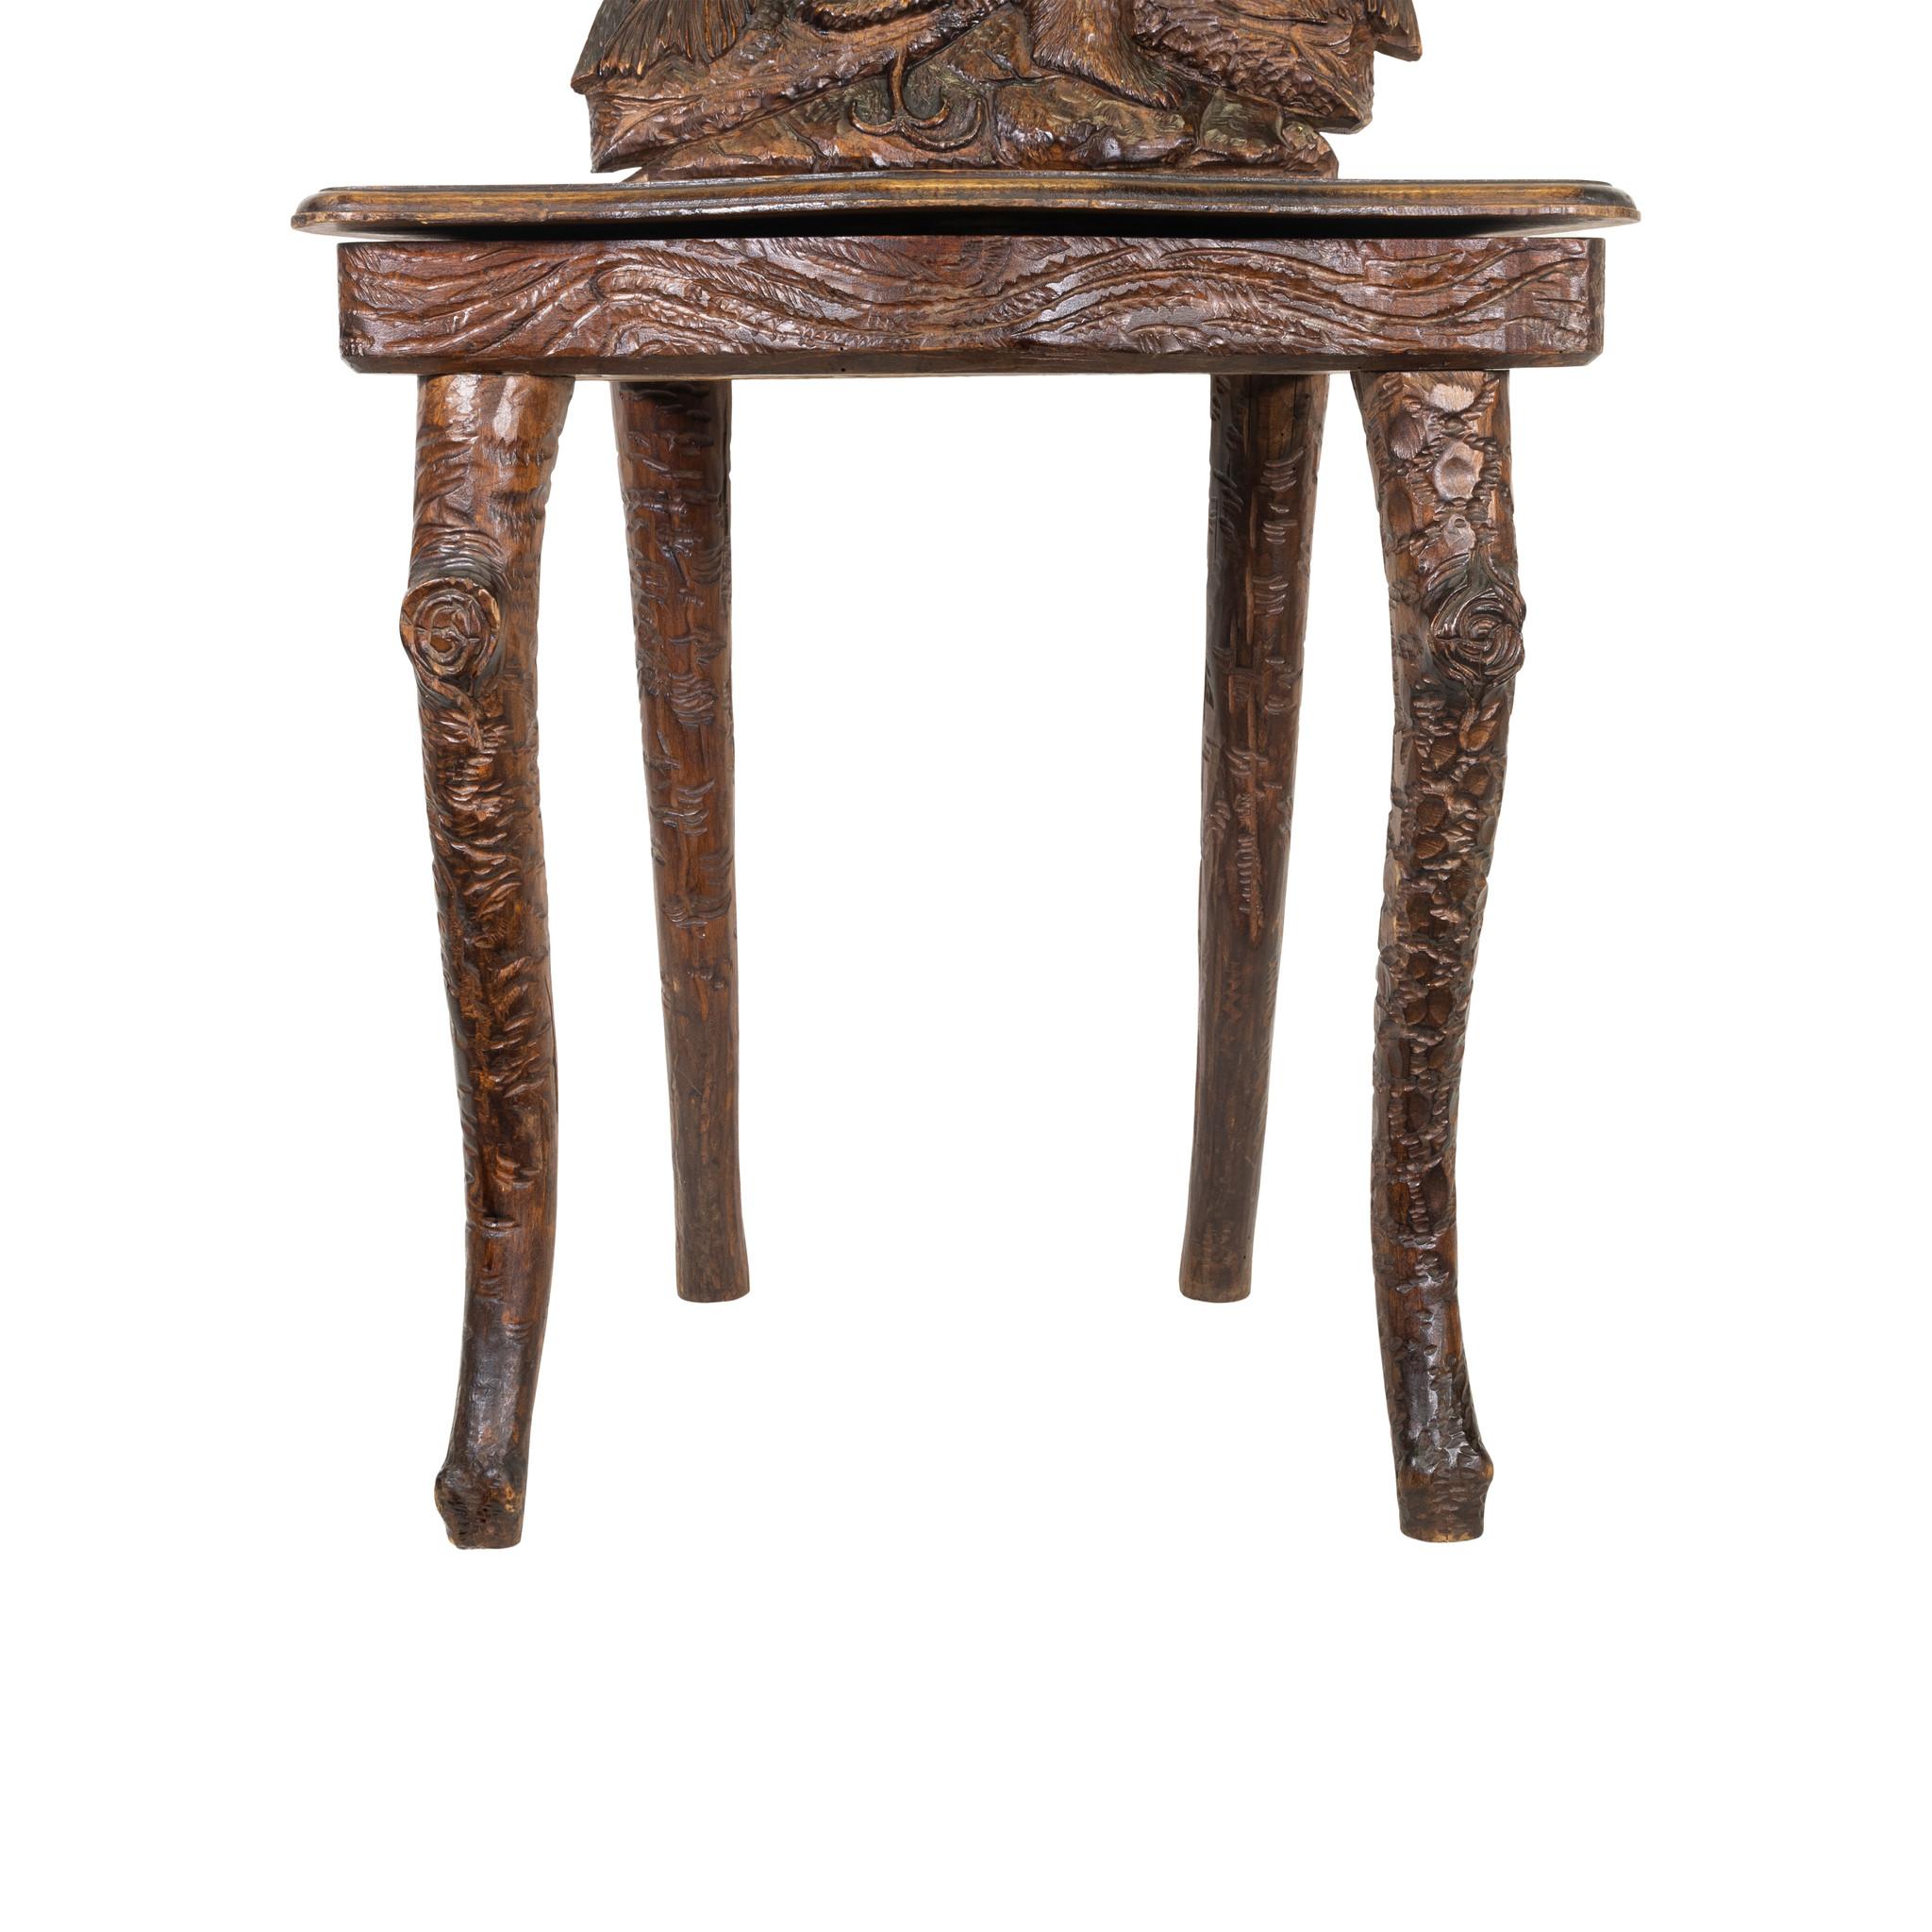 Black Forest Swiss carved chair having bear on fallen log. Carved bear on lifting seat which once had a music box. Part of the Brienz collection plate 26.

Origin: Swiss
Period: Last quarter of the 19th century
Dimensions: 38